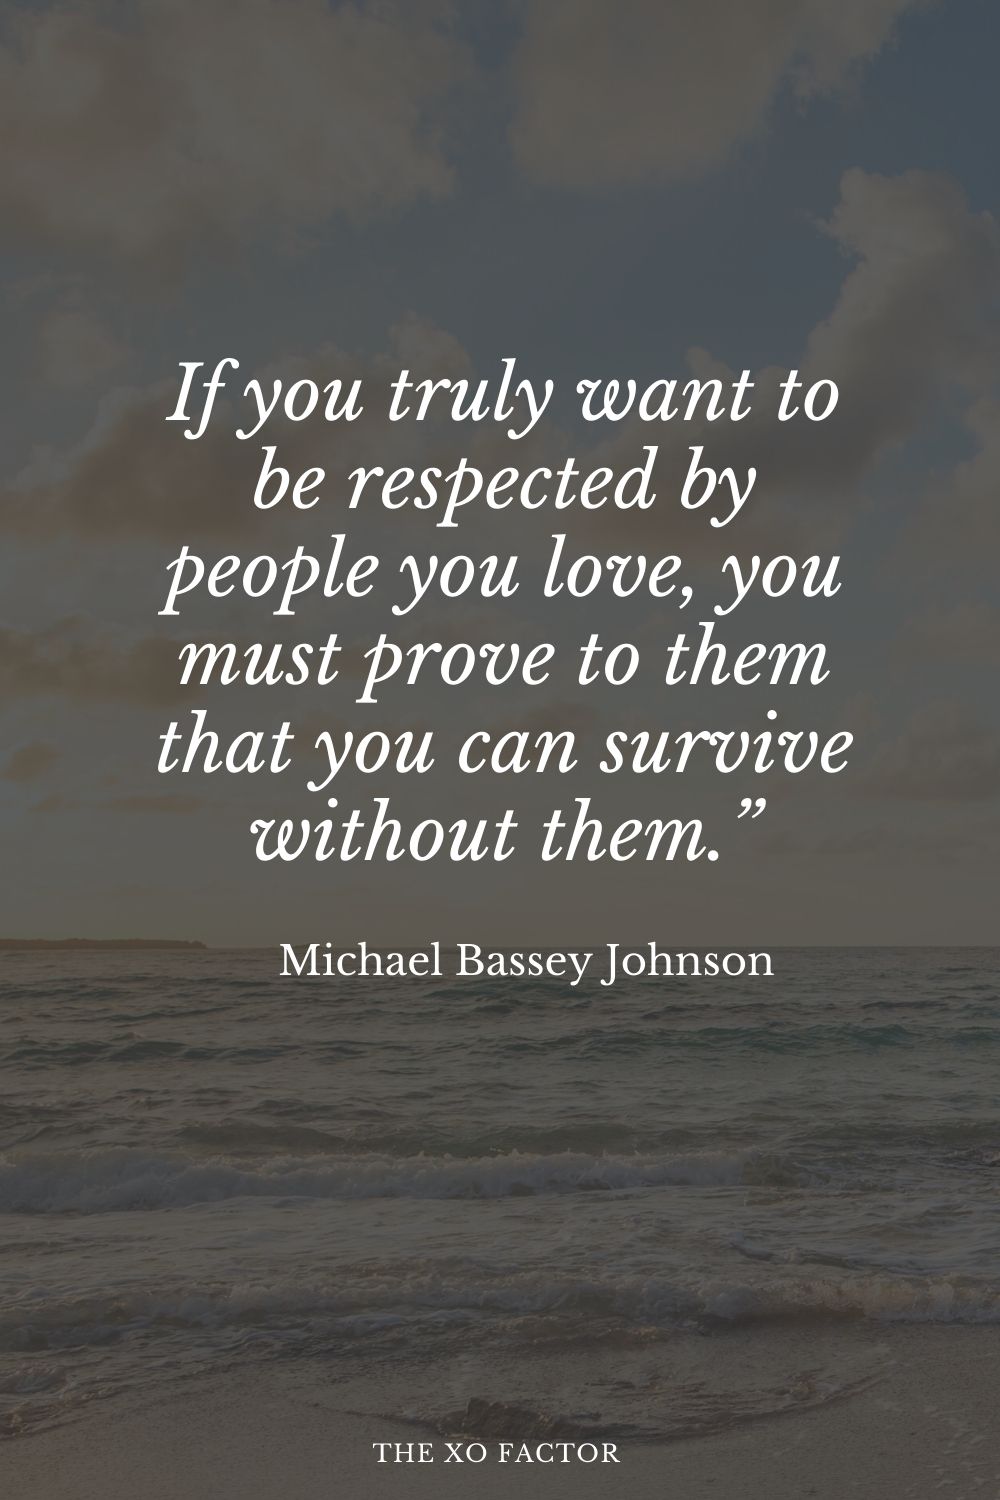 If you truly want to be respected by people you love, you must prove to them that you can survive without them.” Michael Bassey Johnson